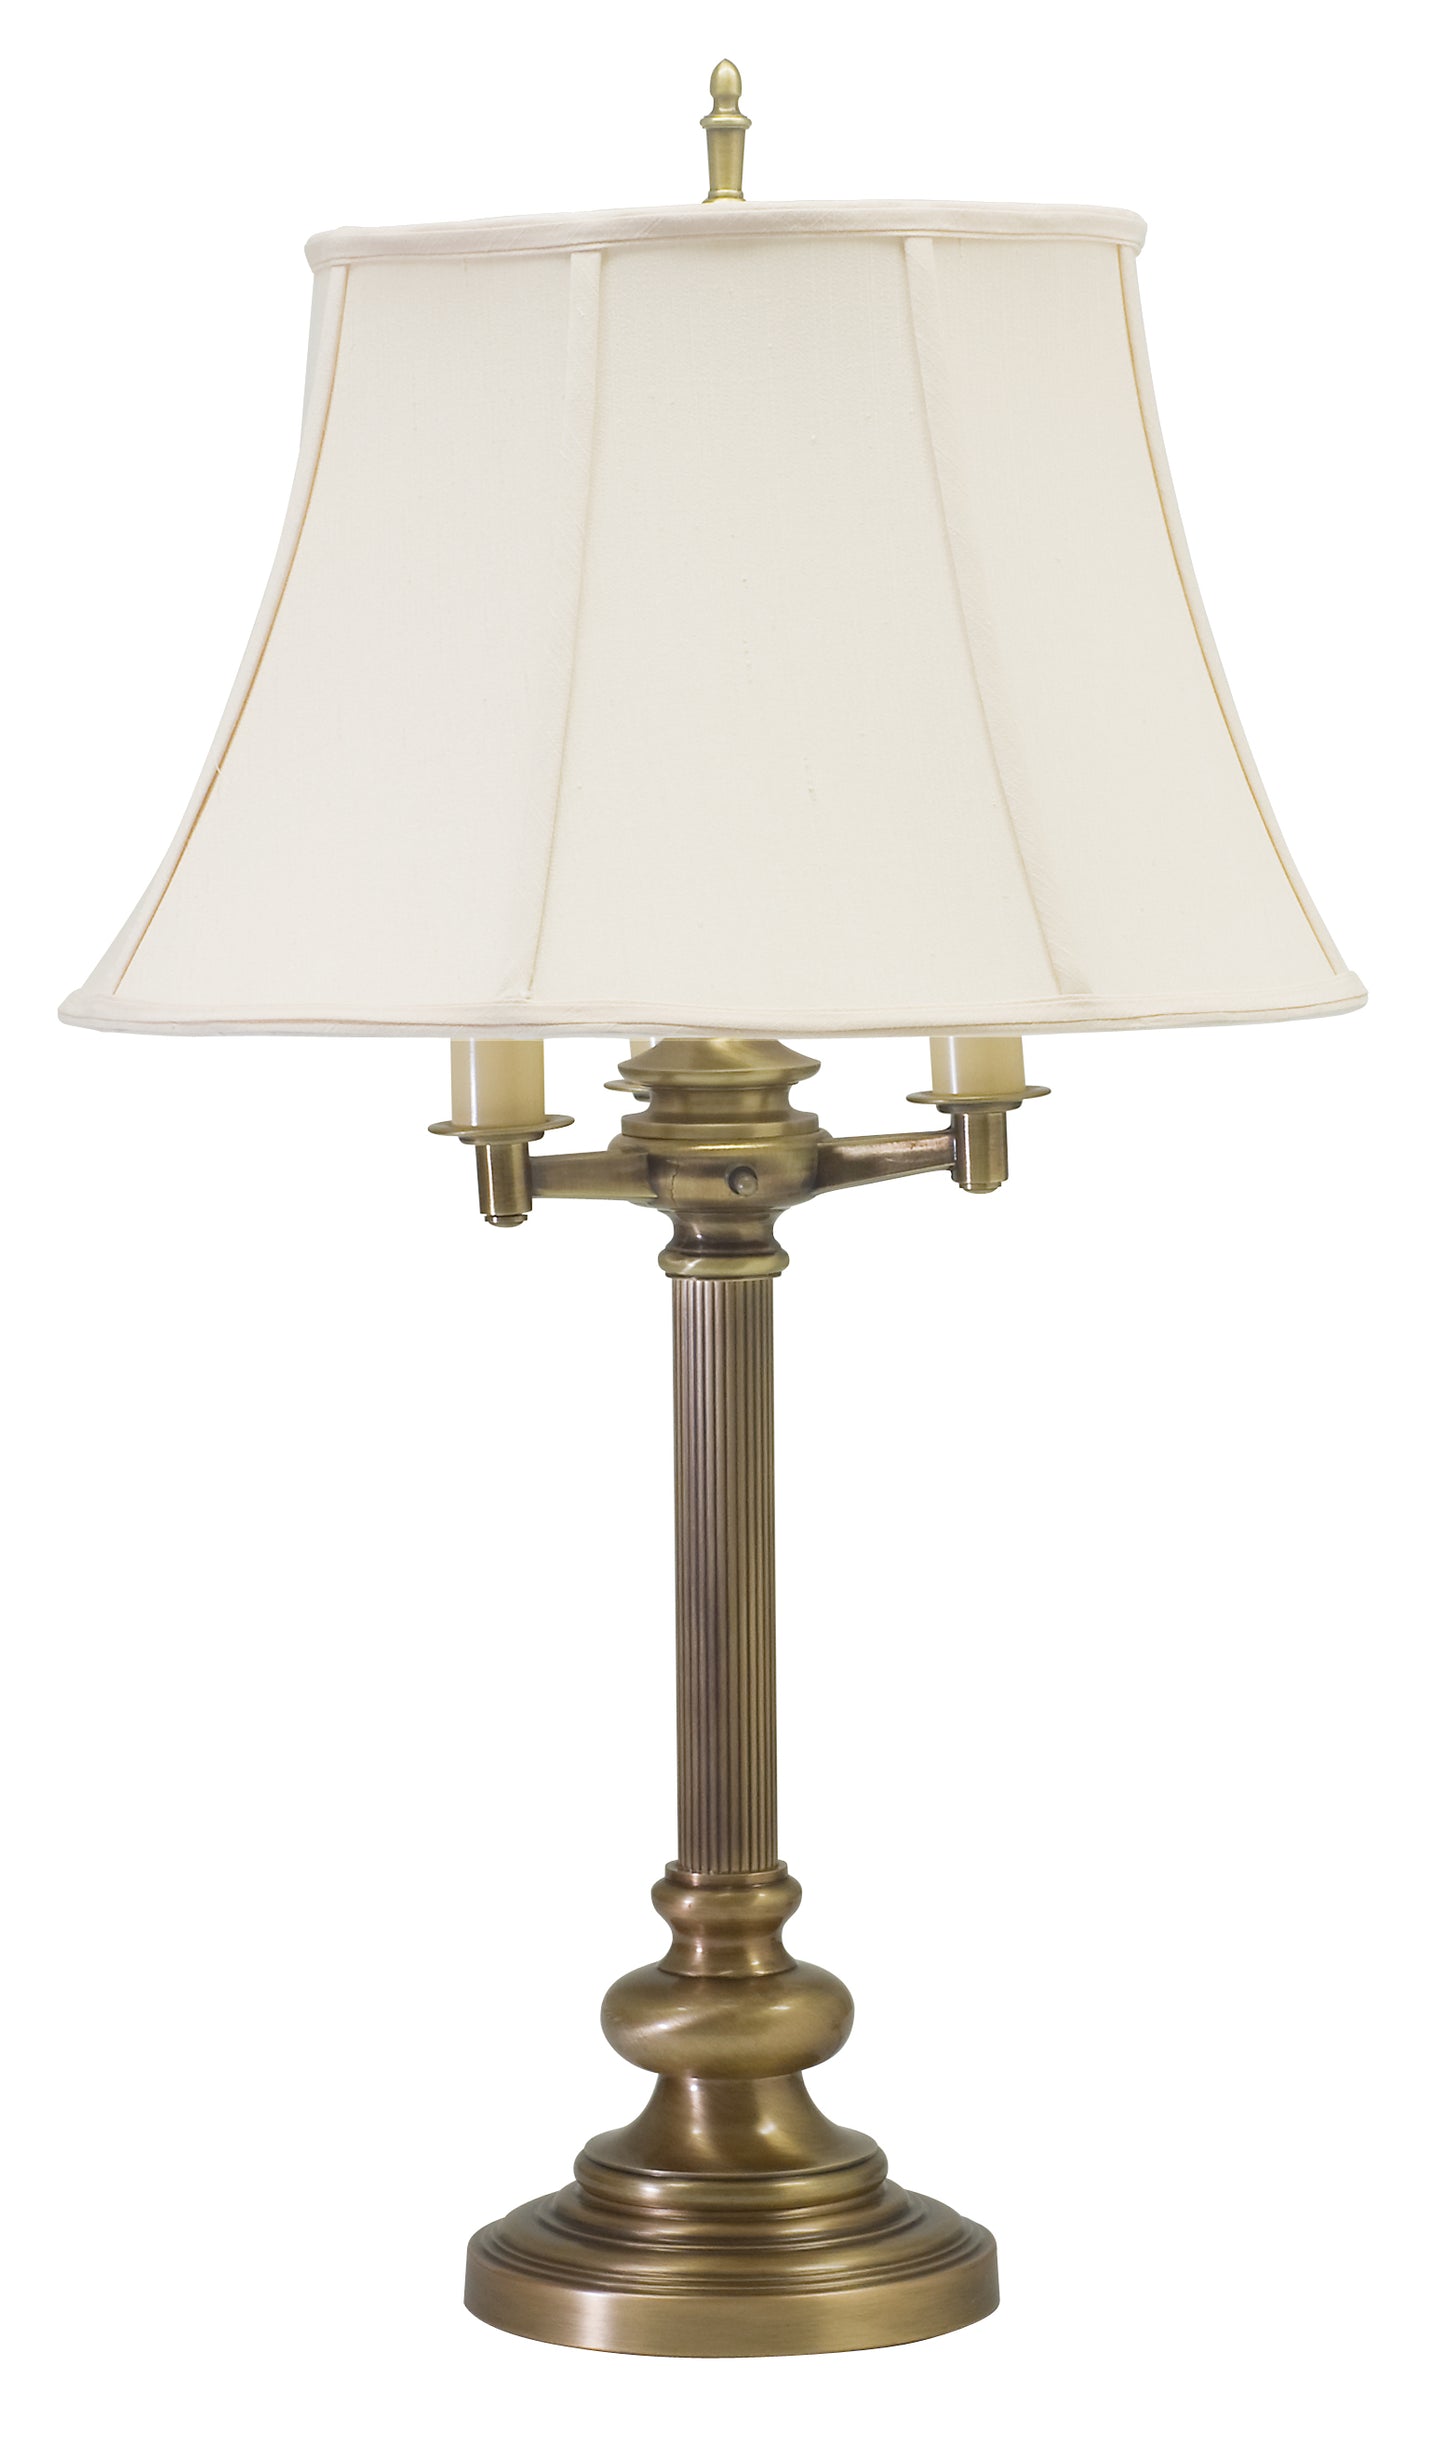 House of Troy Newport 30" Antique Brass Six-Way Table Lamp N650-AB